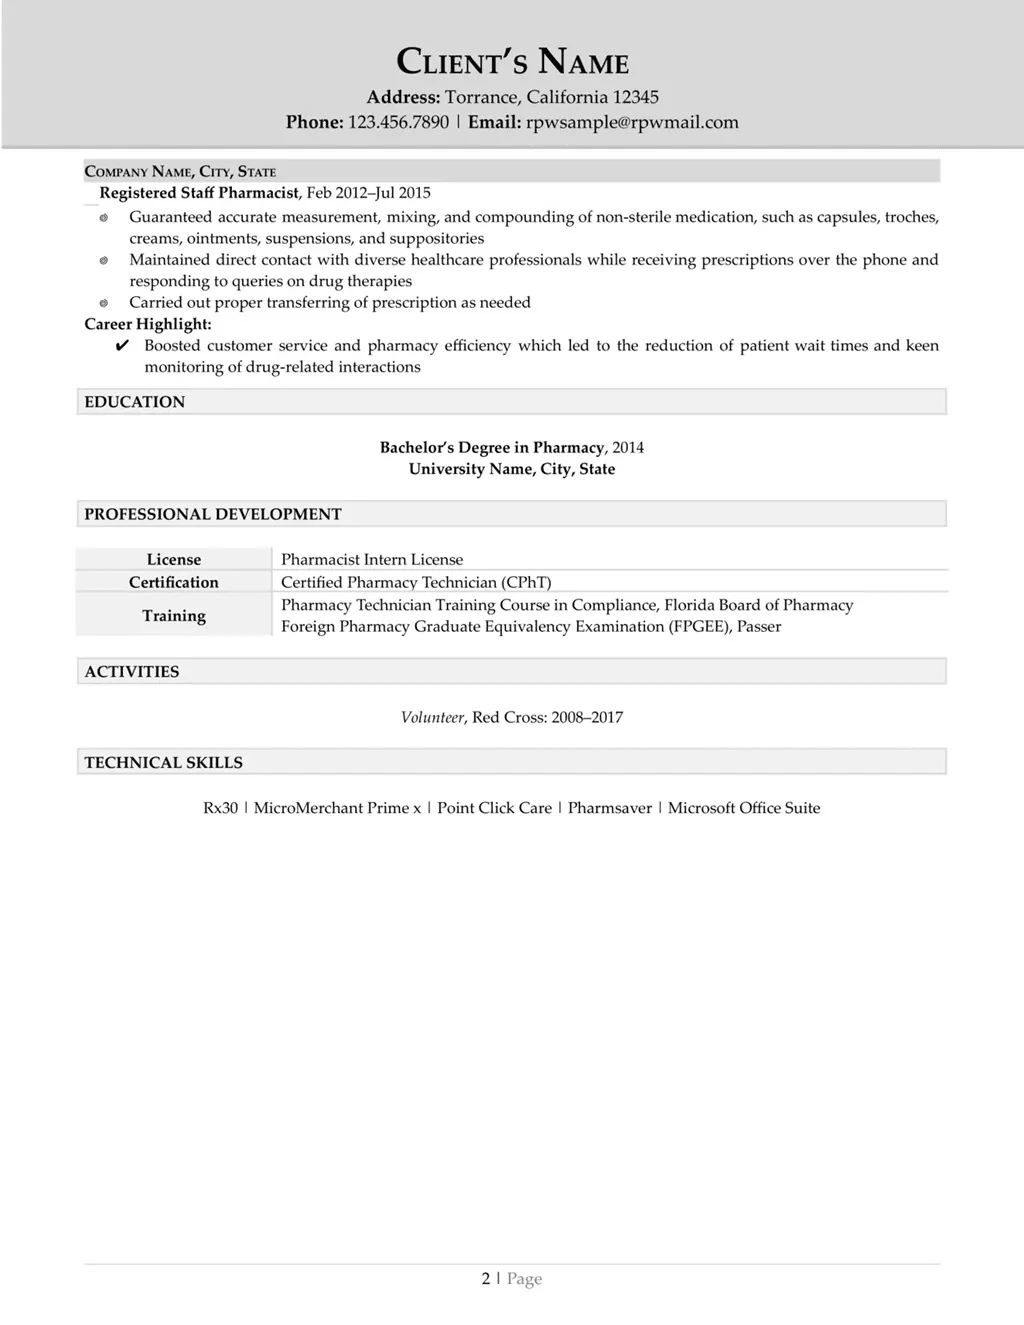 Pharmacist Resume Example Page Two